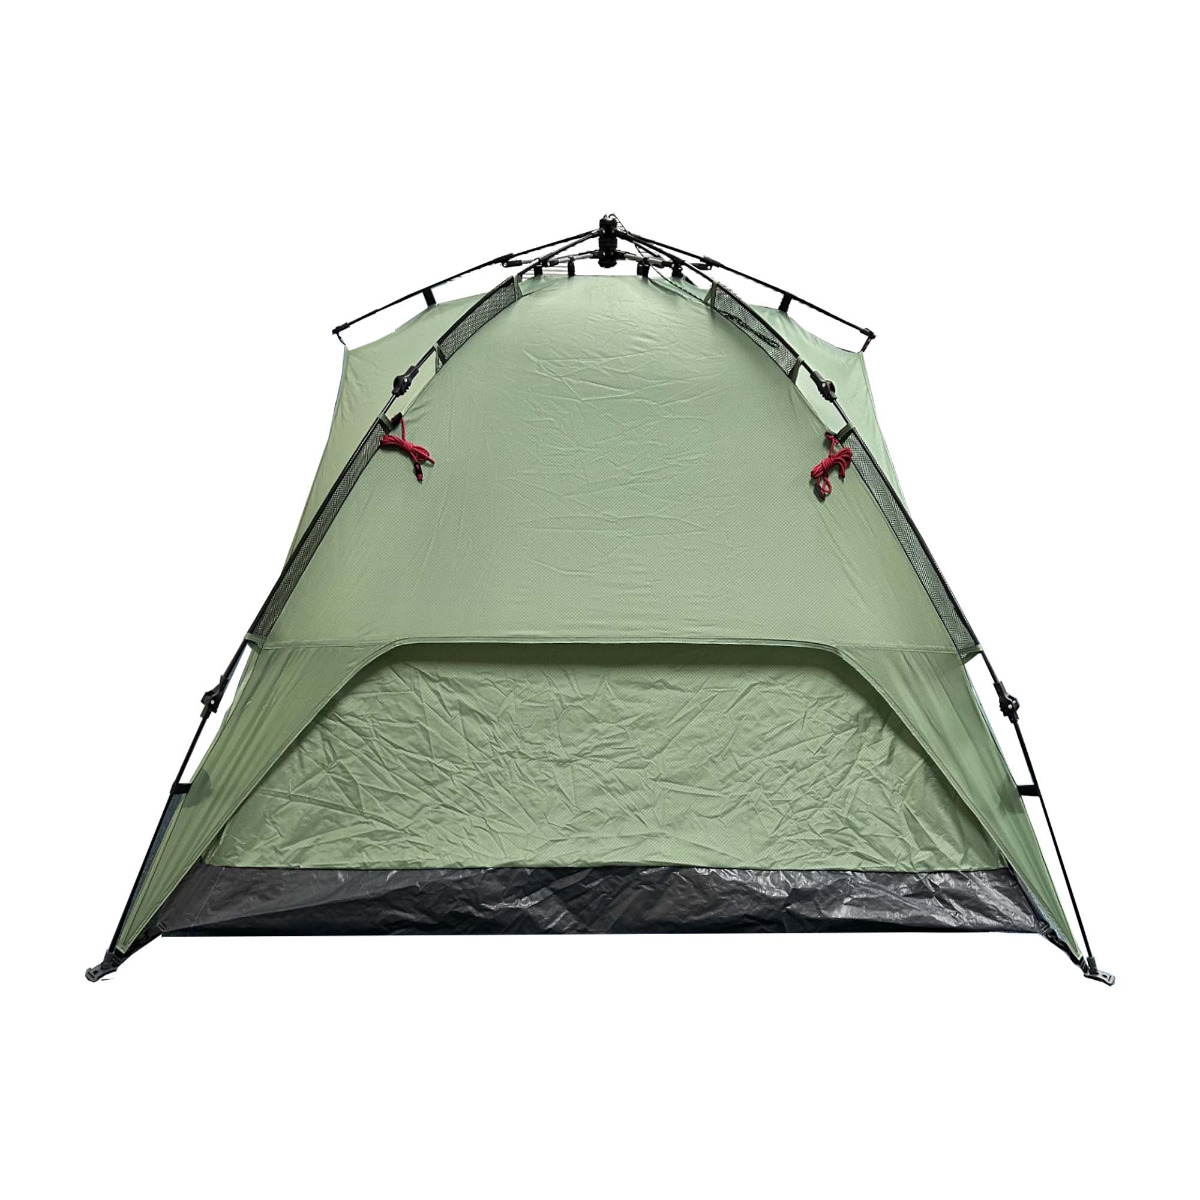 HI-COUNTRY 3P QUICK-UP TENT